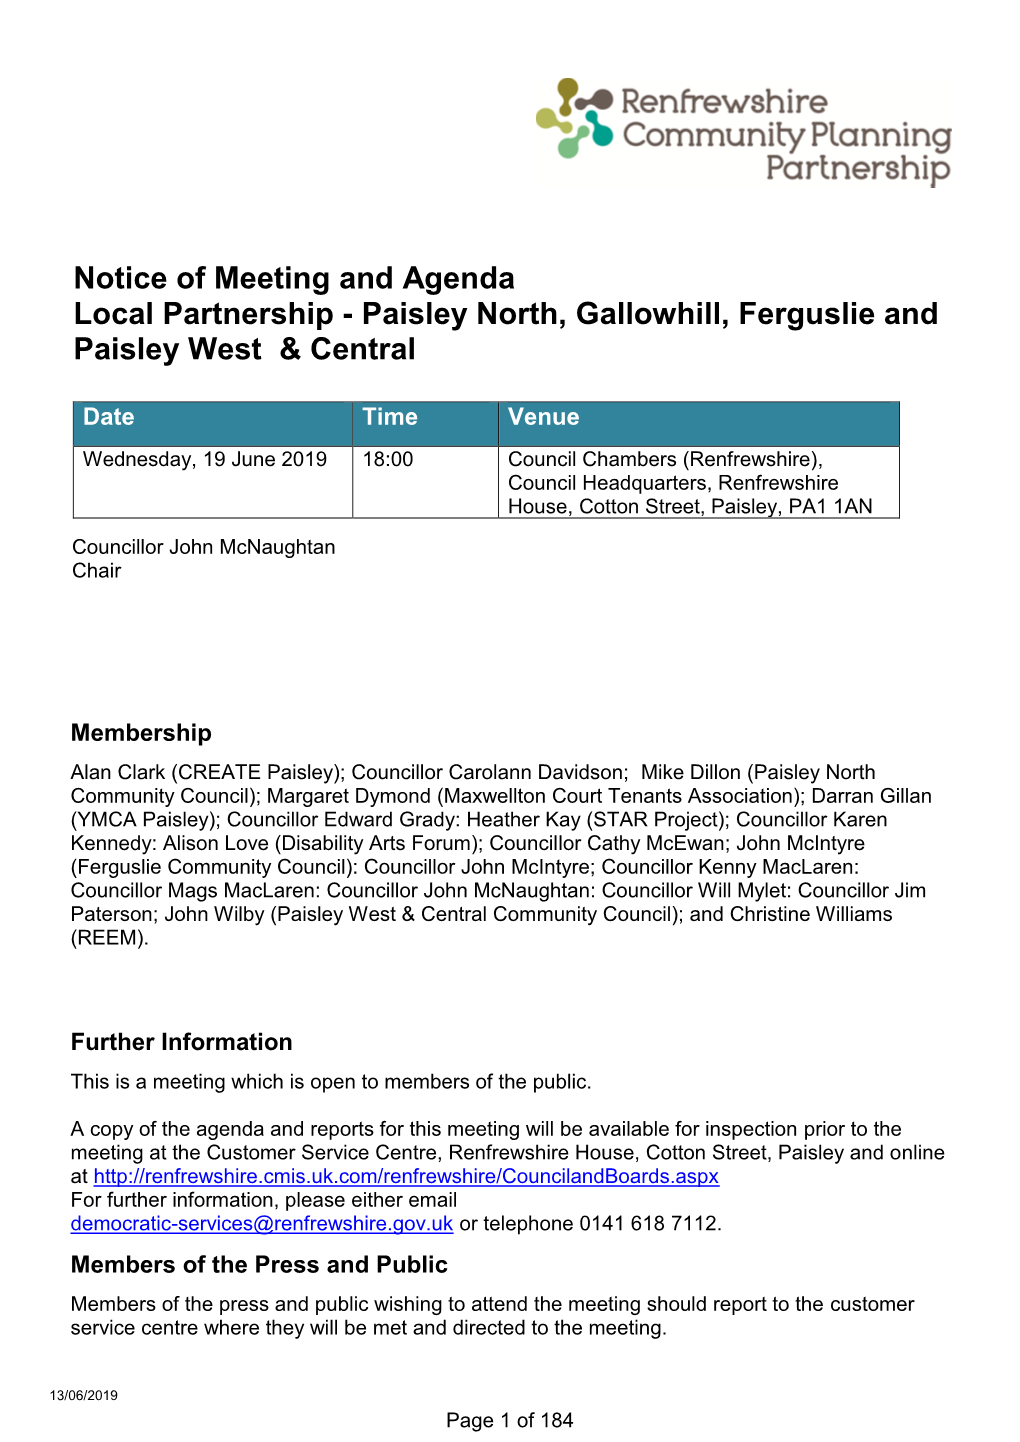 Notice of Meeting and Agenda Local Partnership - Paisley North, Gallowhill, Ferguslie and Paisley West & Central